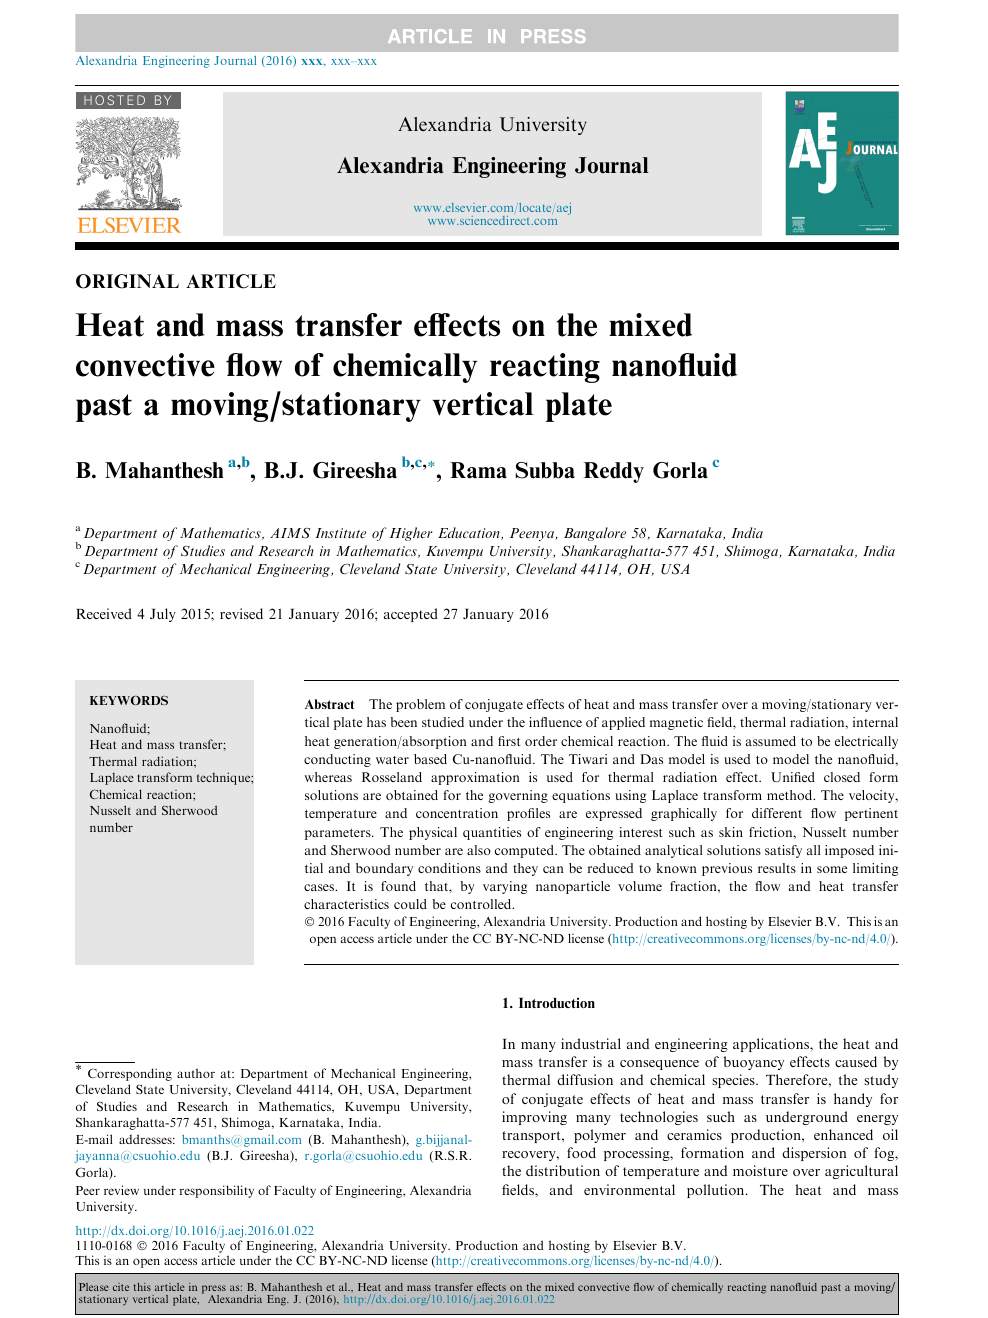 Heat And Mass Transfer Effects On The Mixed Convective Flow Of Chemically Reacting Nanofluid Past A Moving Stationary Vertical Plate Topic Of Research Paper In Physical Sciences Download Scholarly Article Pdf And